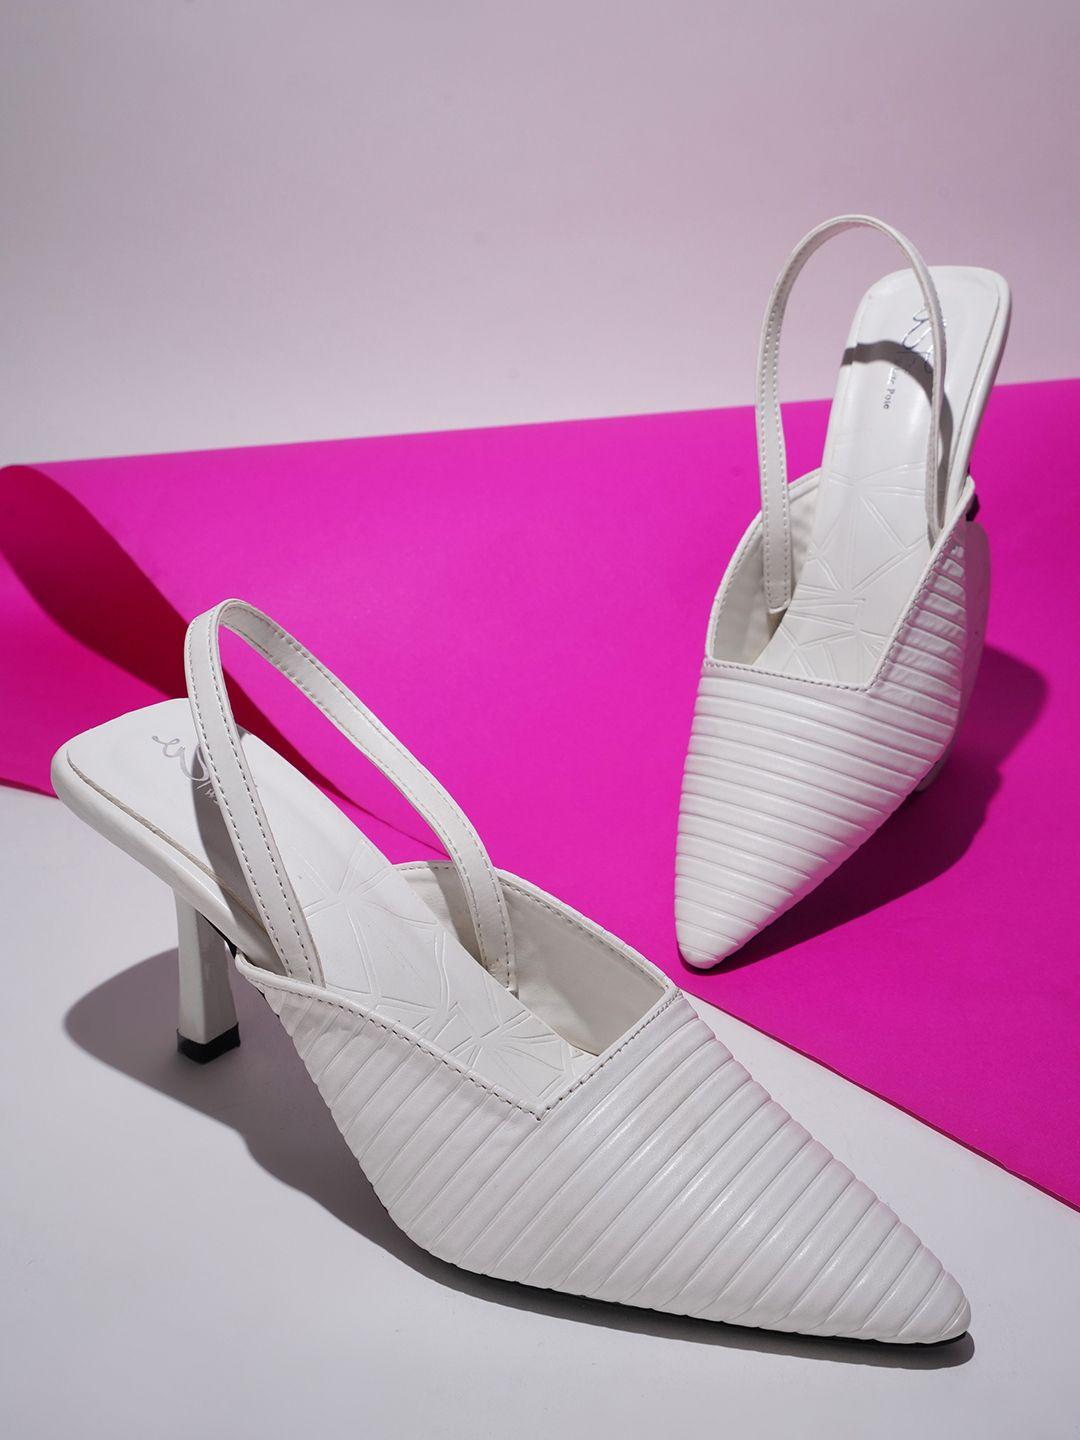 the white pole textured pointed toe stiletto pumps with backstrap